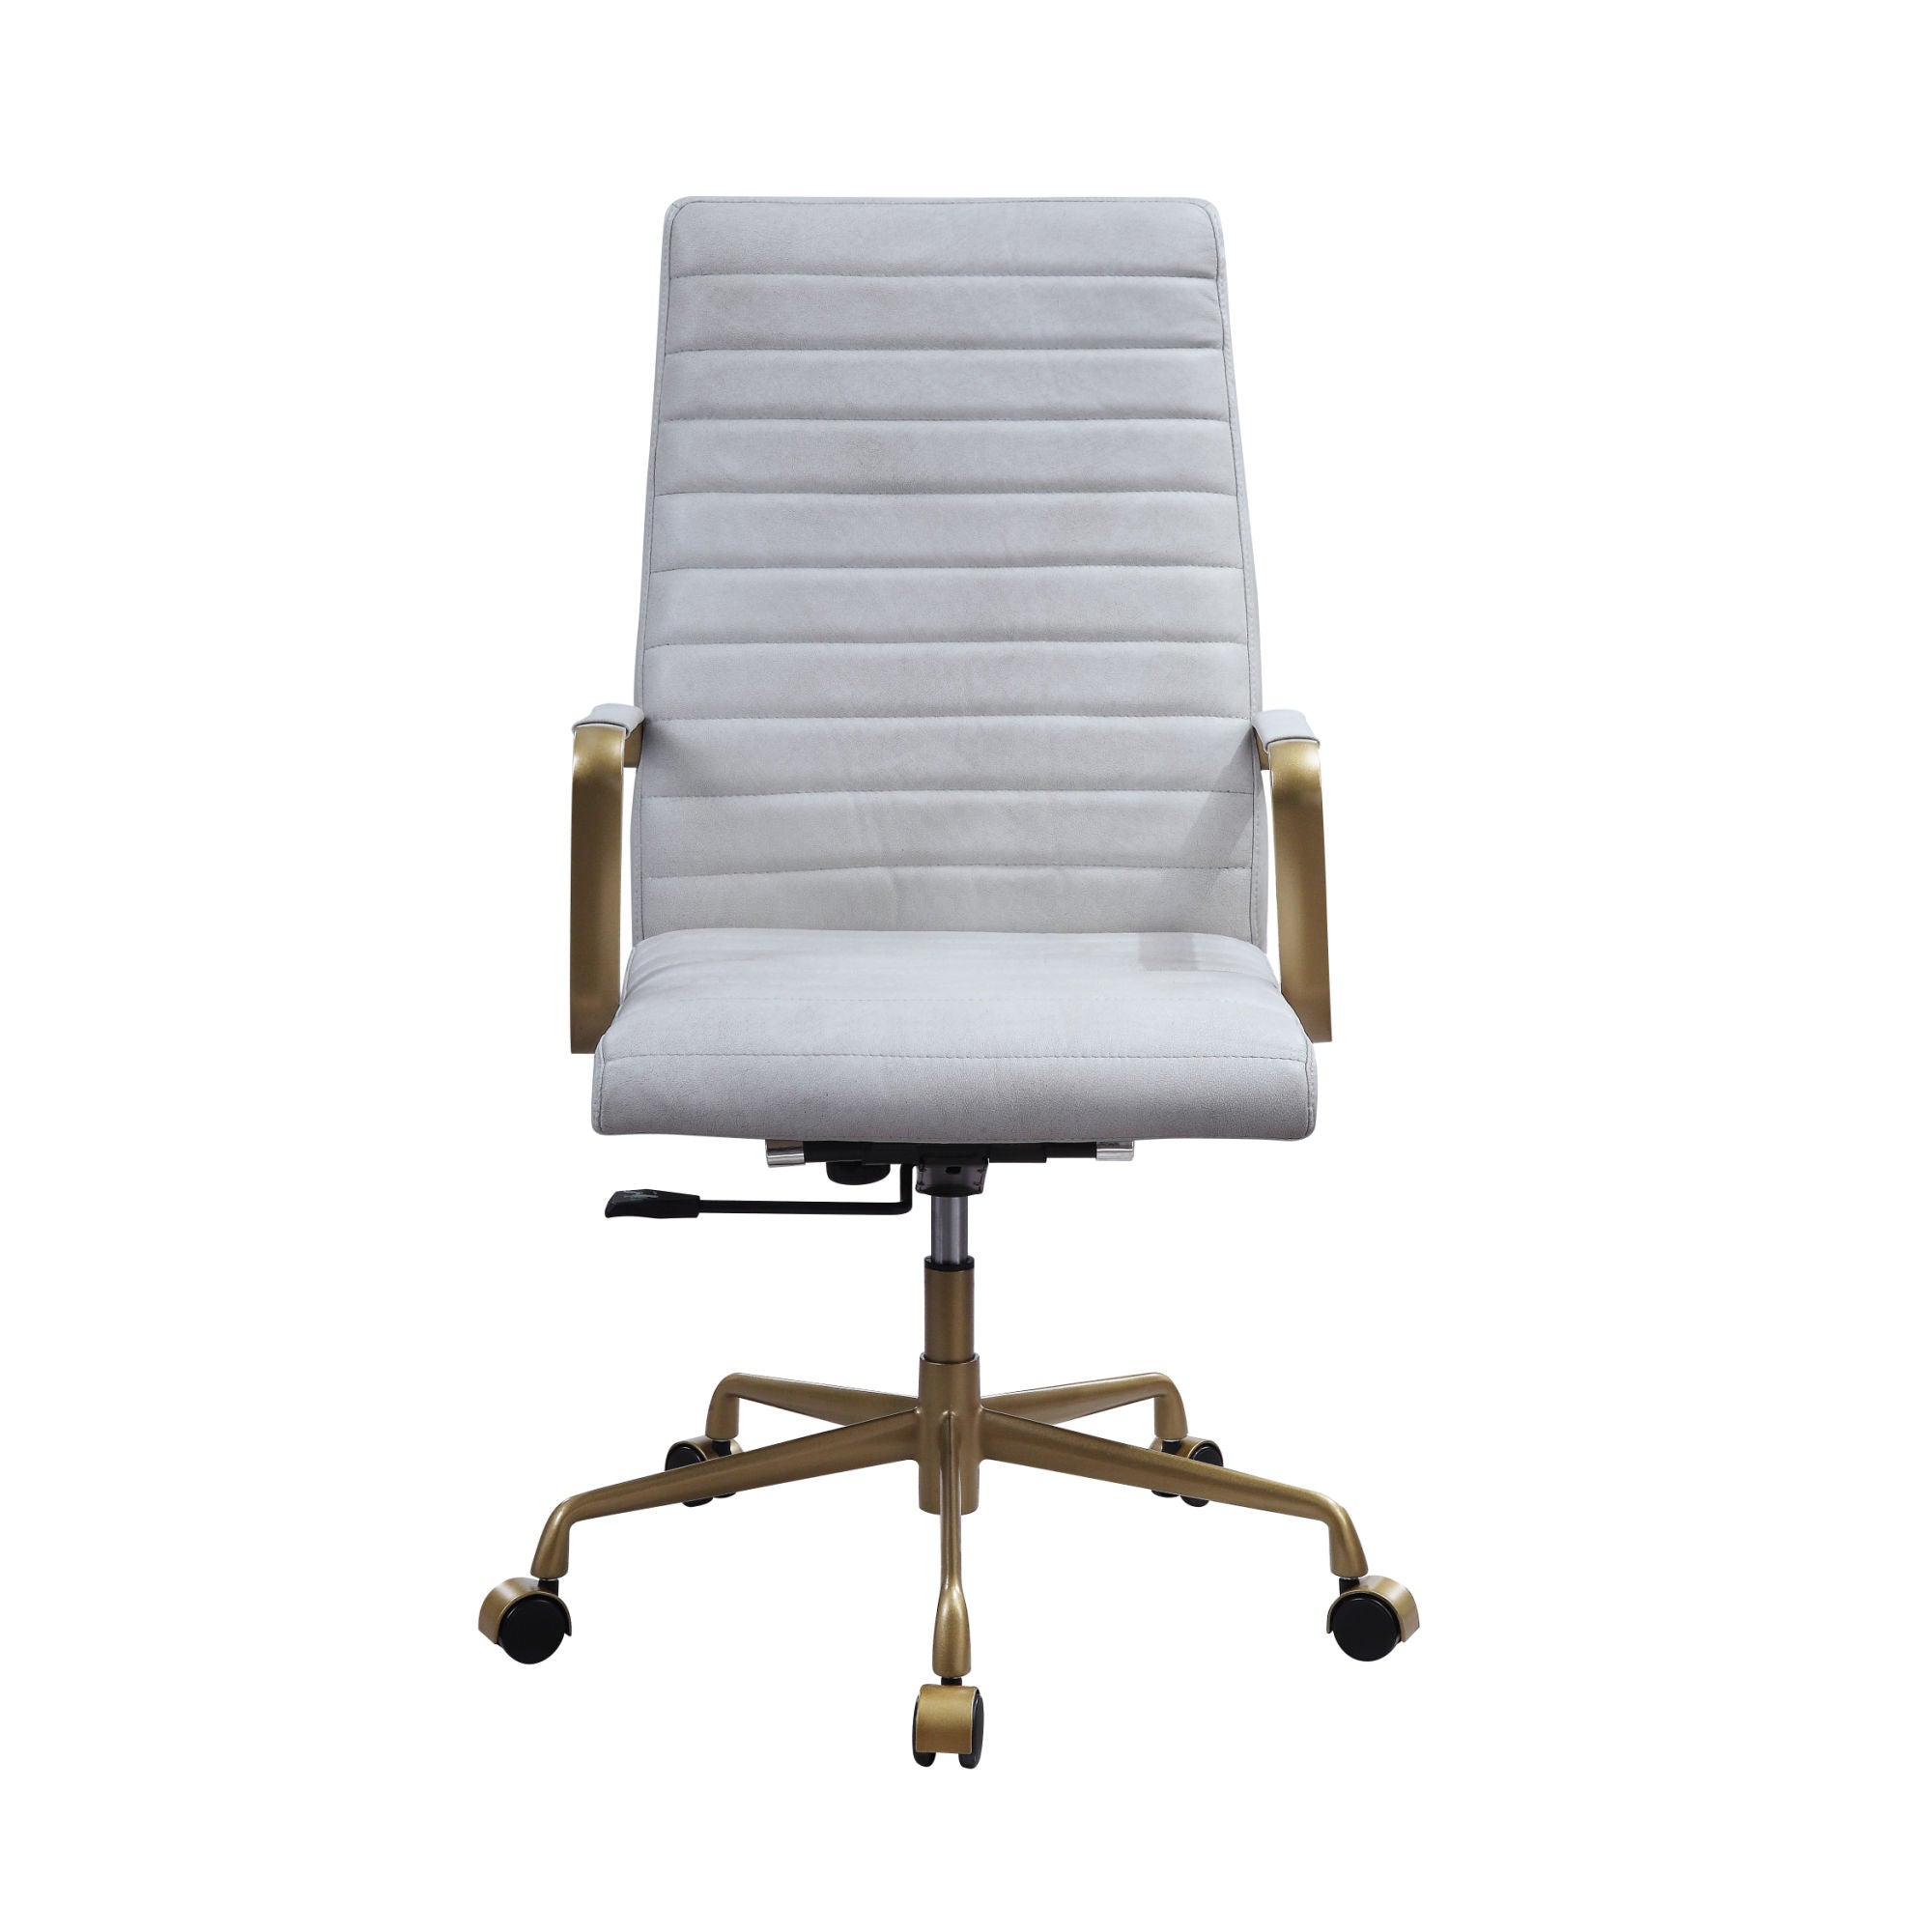 White Leather Chair Office